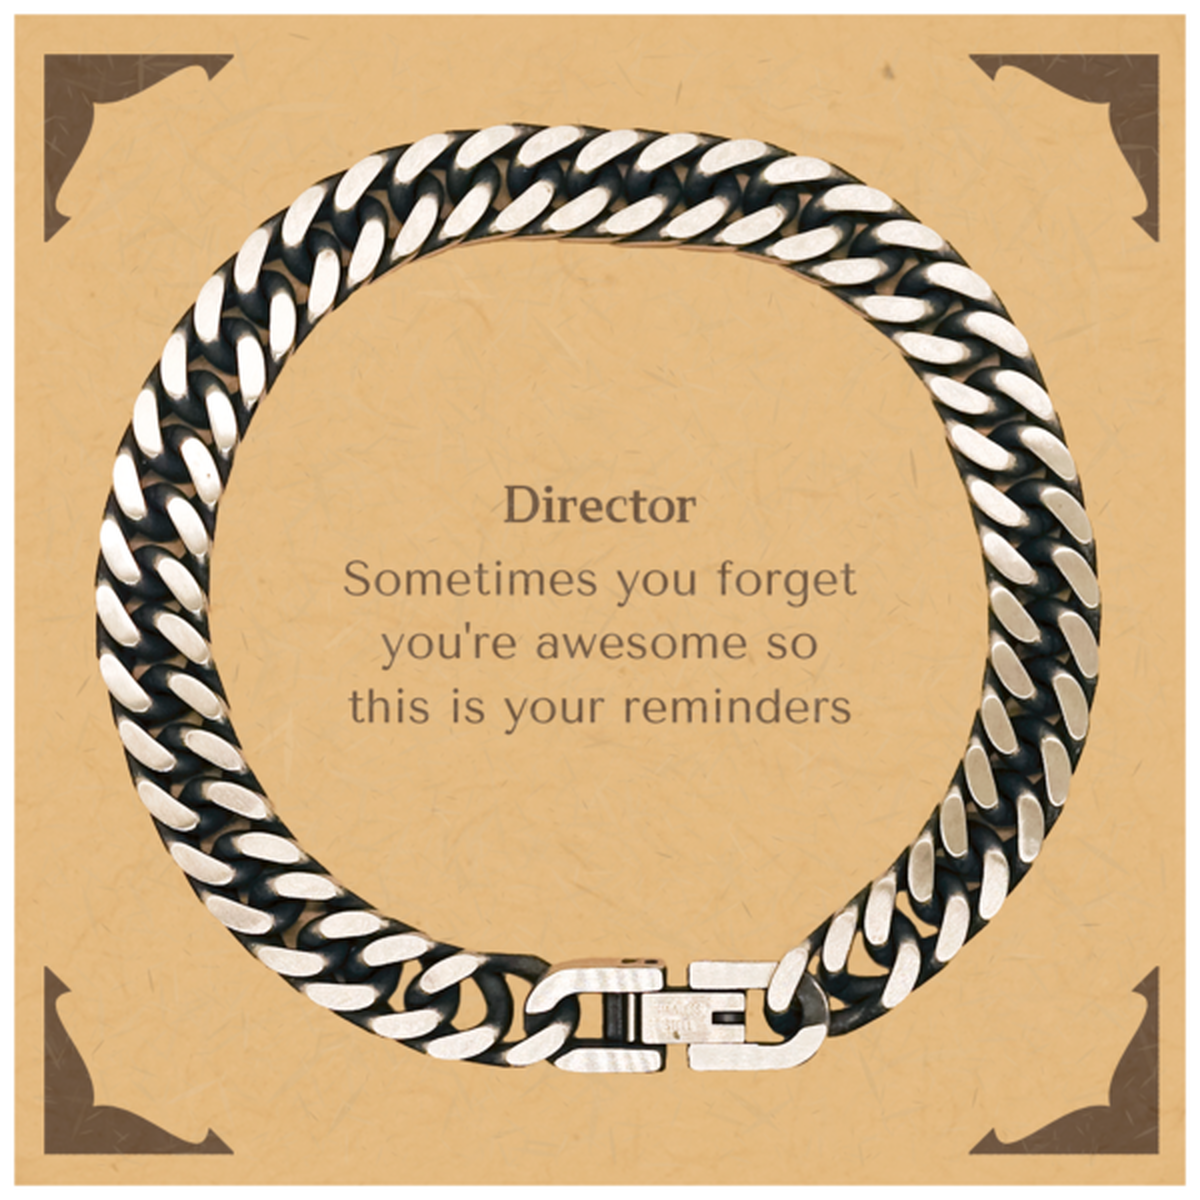 Sentimental Director Cuban Link Chain Bracelet, Director Sometimes you forget you're awesome so this is your reminders, Graduation Christmas Birthday Gifts for Director, Men, Women, Coworkers